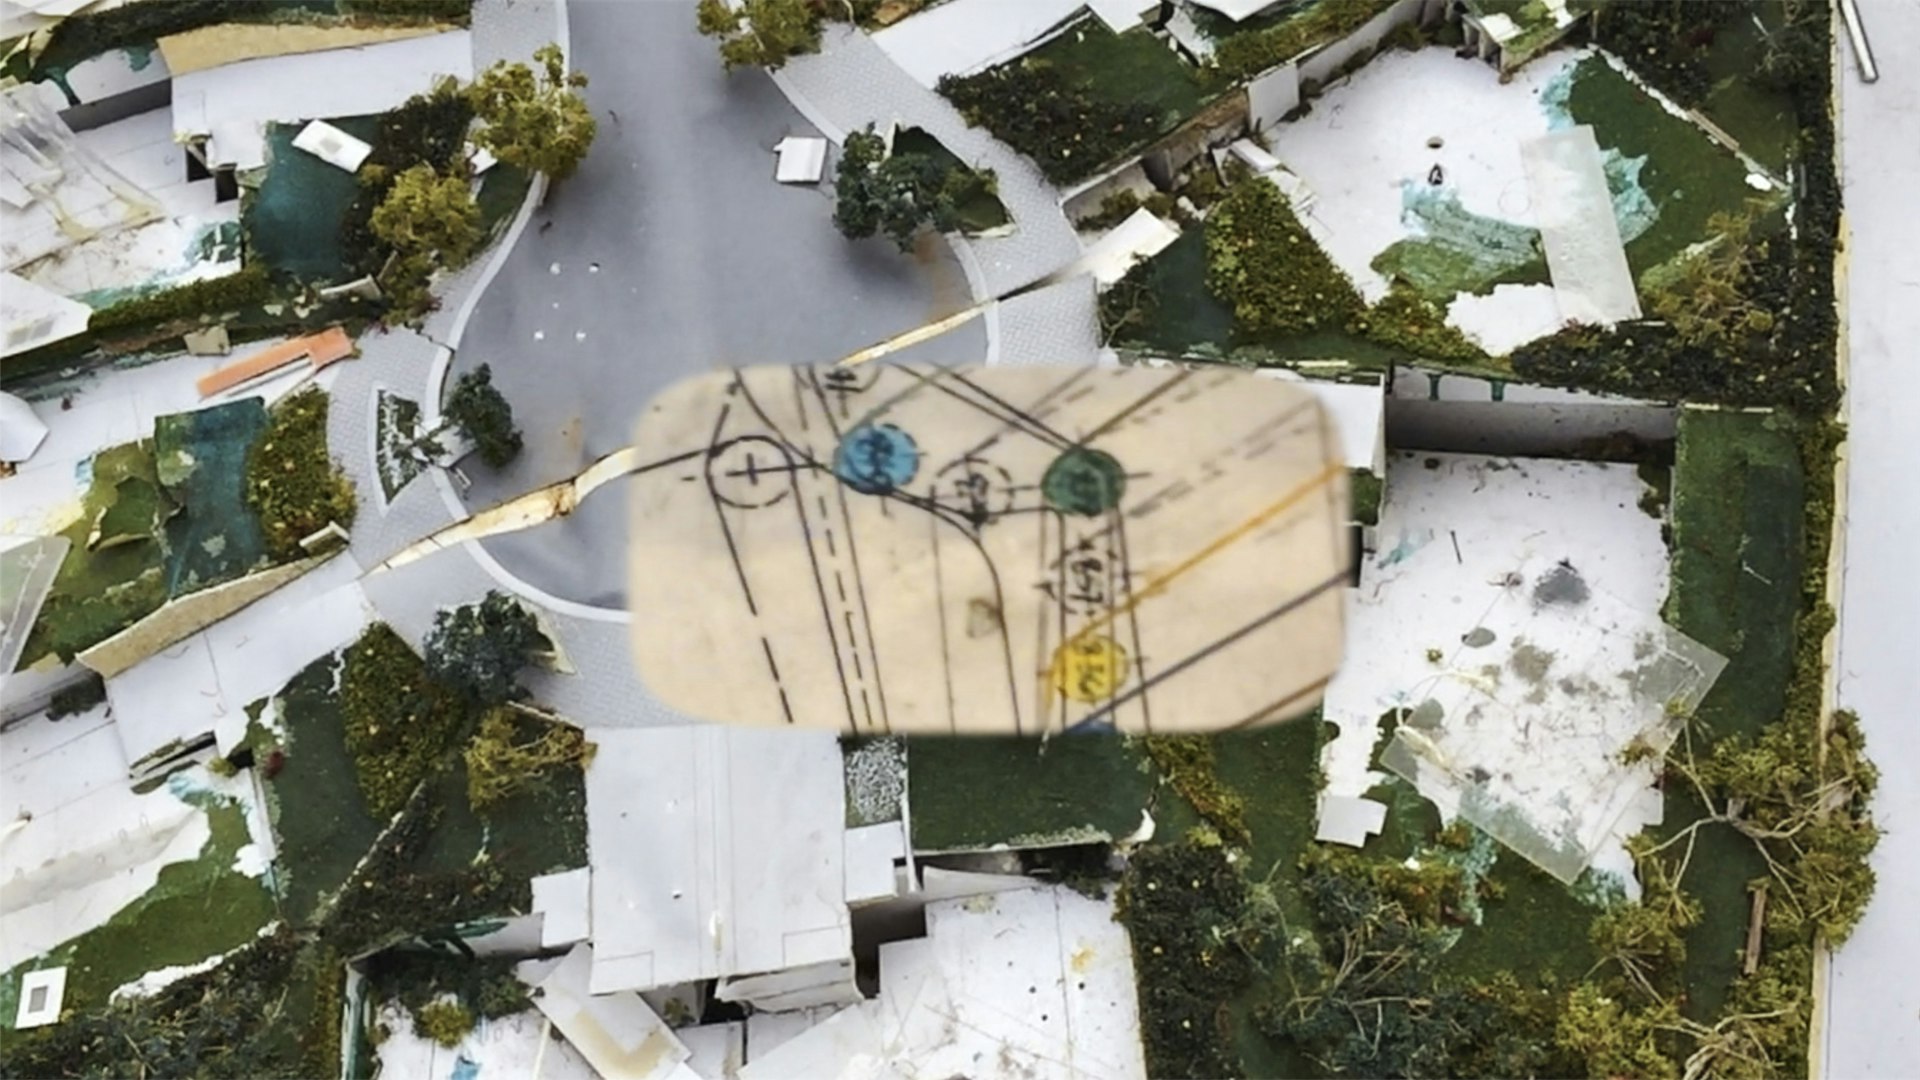 A cut-out of a handdrawn map, superimposed over a miniature model of a bedraggled suburban landscape.